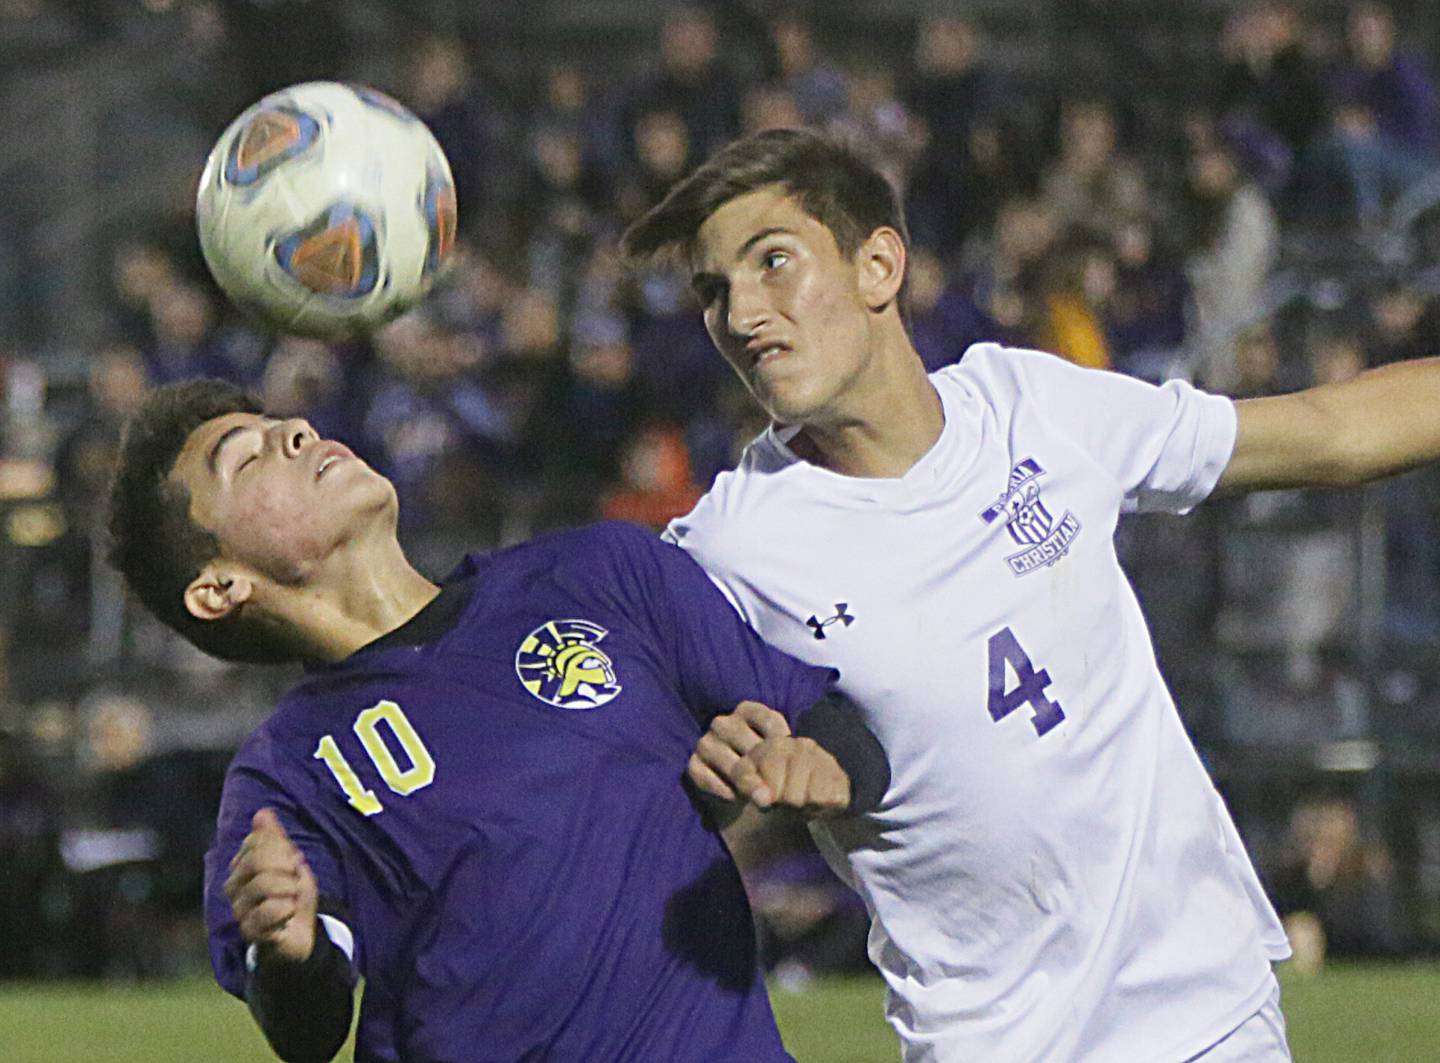 Mendota's Yahir Diaz, (no,10) beats Peoria Christian's Bryce Pollizze (no,4) to a header in the Class 1A Sectional semifinal game in Chillicothe on Tuesday Oct. 19, 2021.